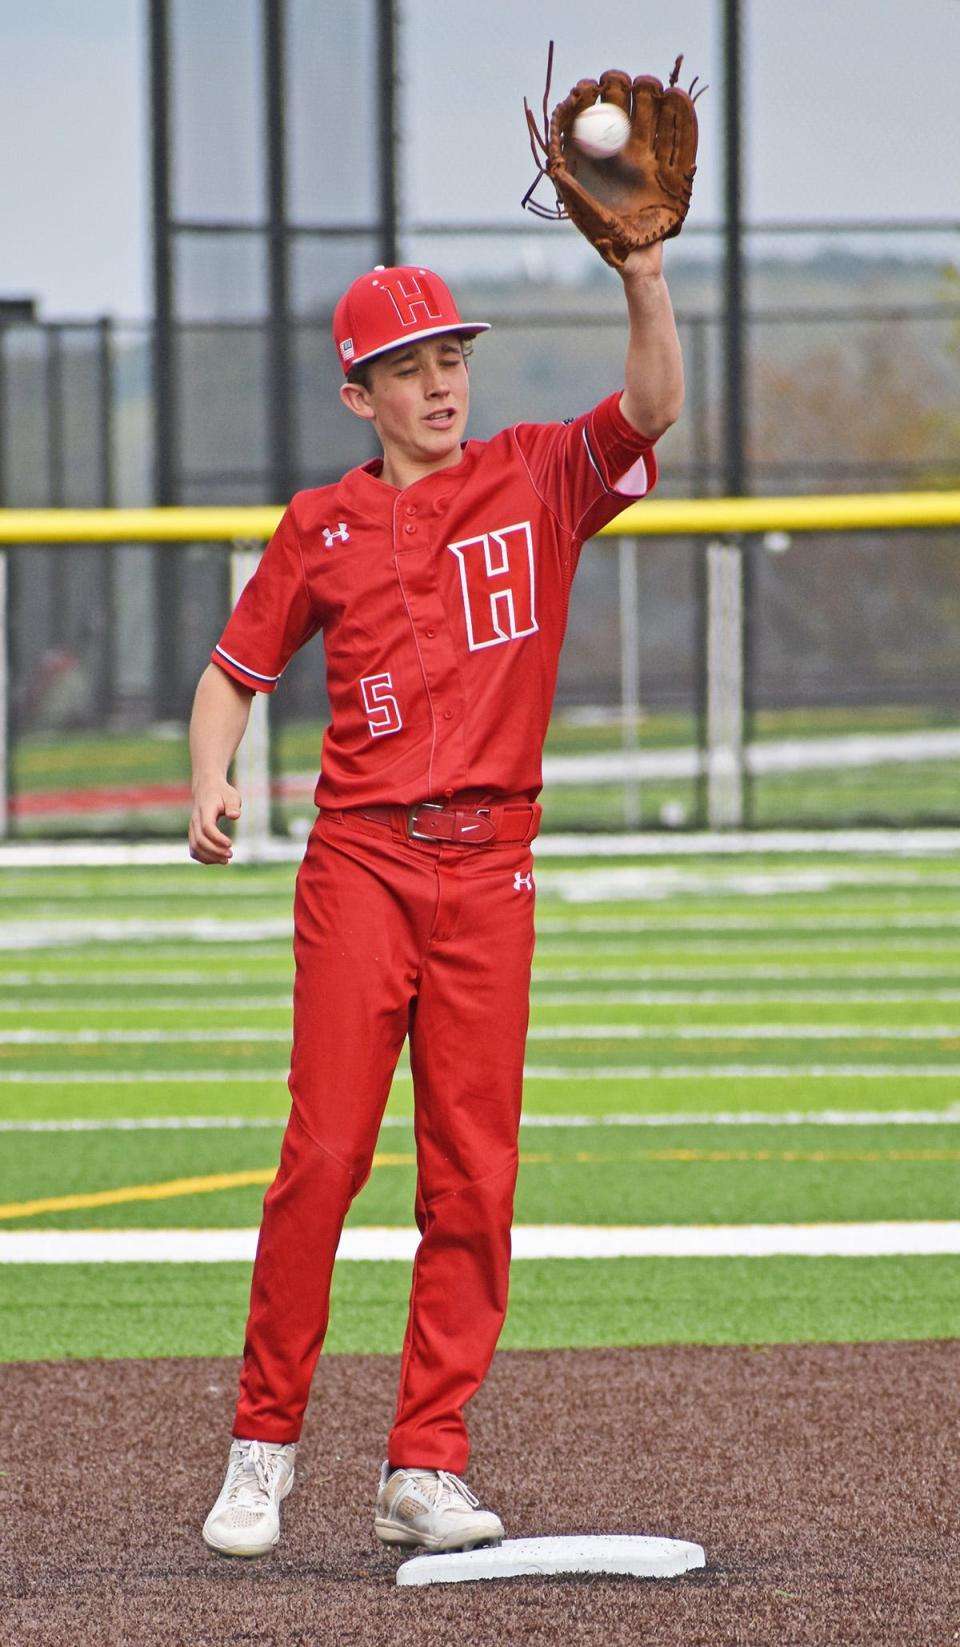 Senior second sacker Jack Esiele has been solid defensively all season for Honesdale in Lackawanna League baseball action.